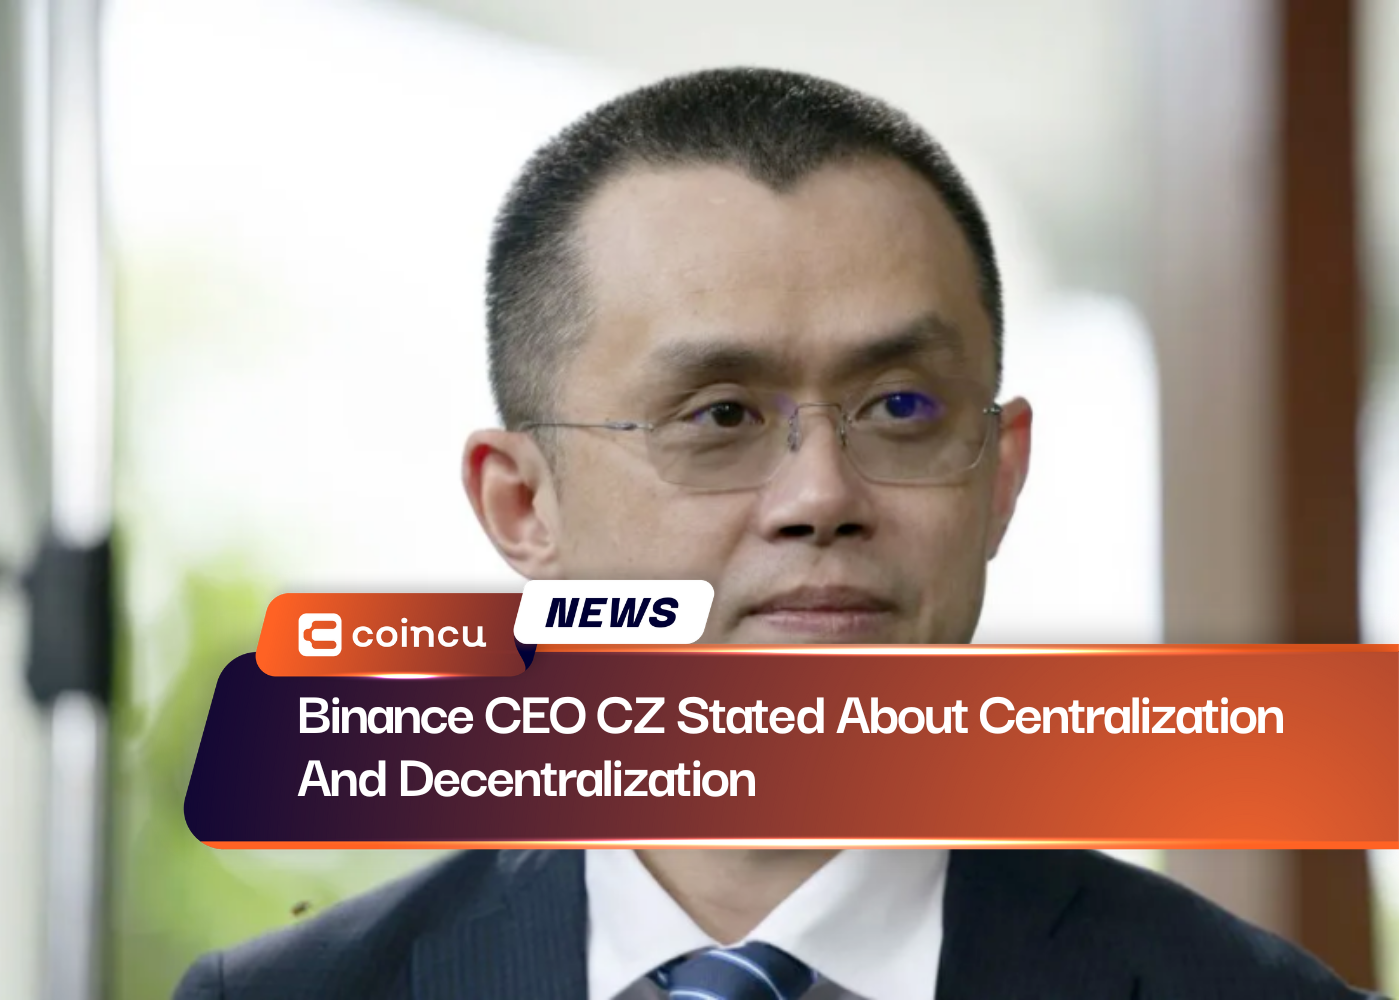 Binance CEO CZ Stated About Centralization And Decentralization